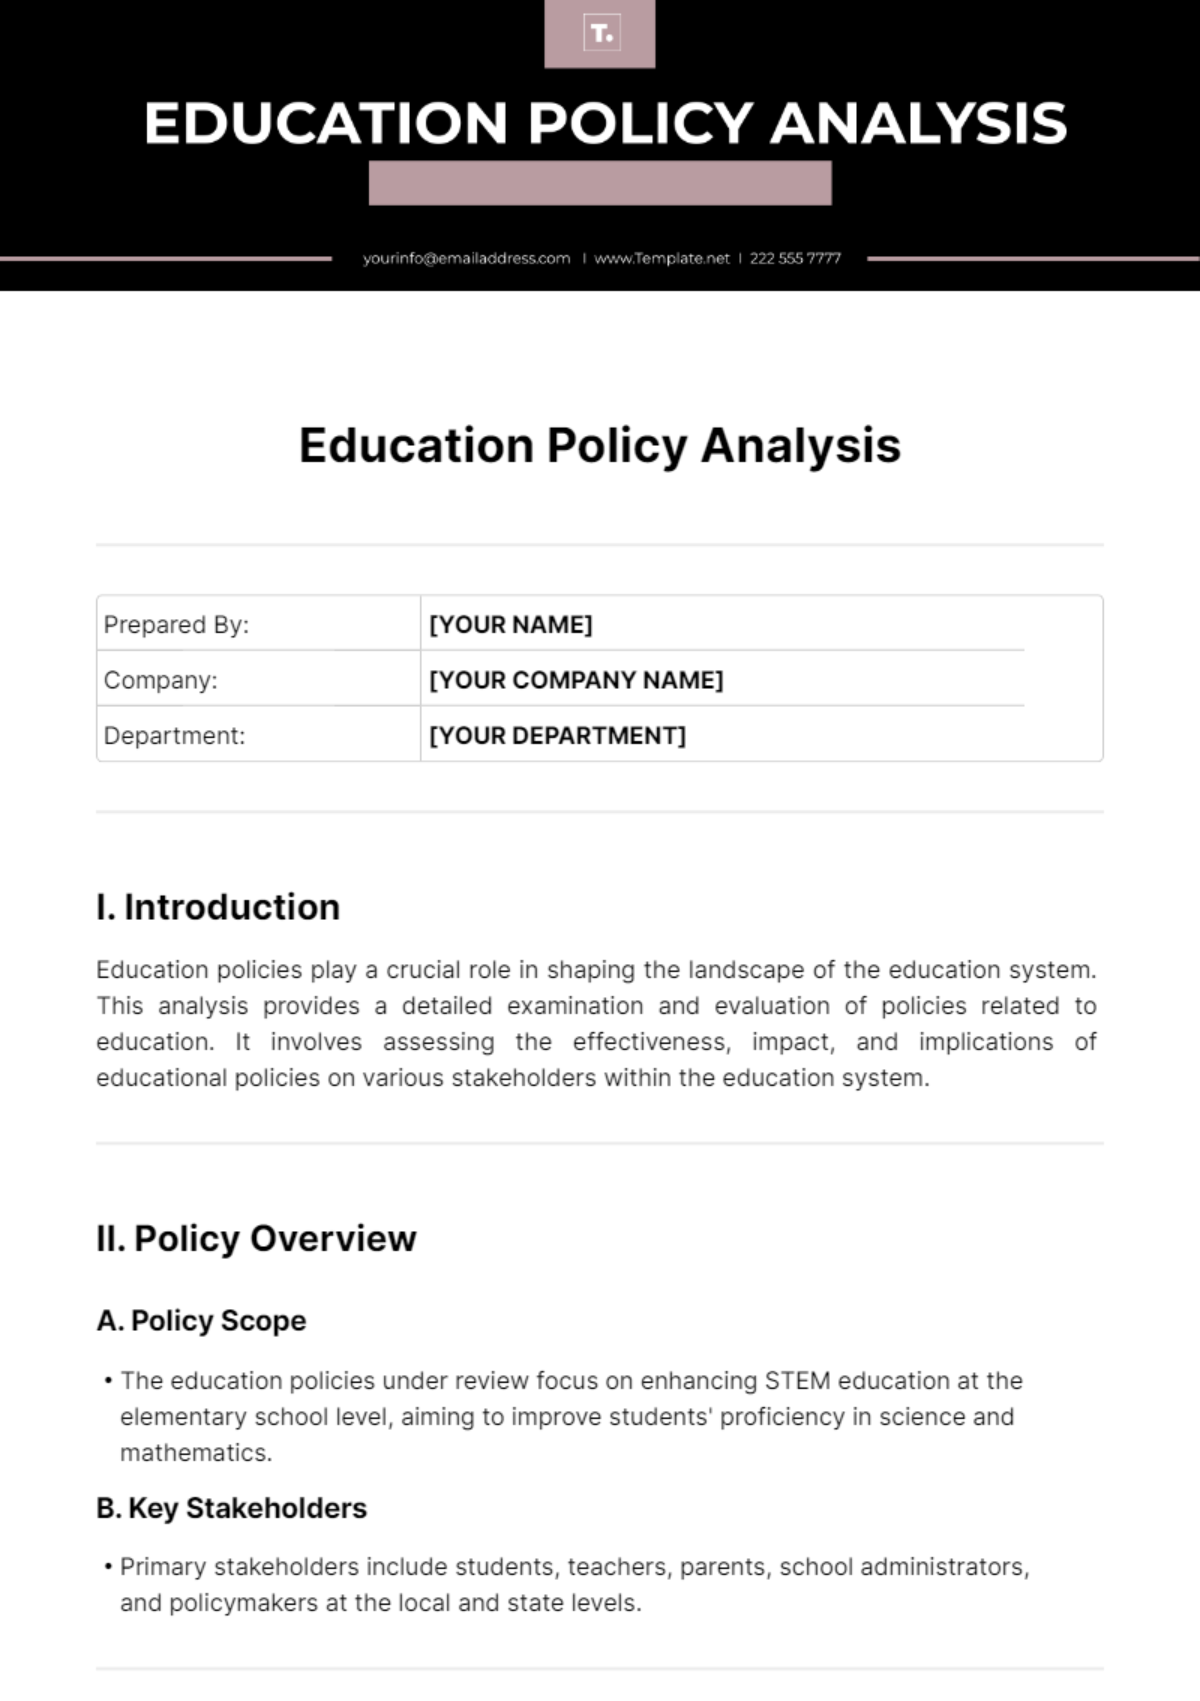 Education Policy Analysis Template